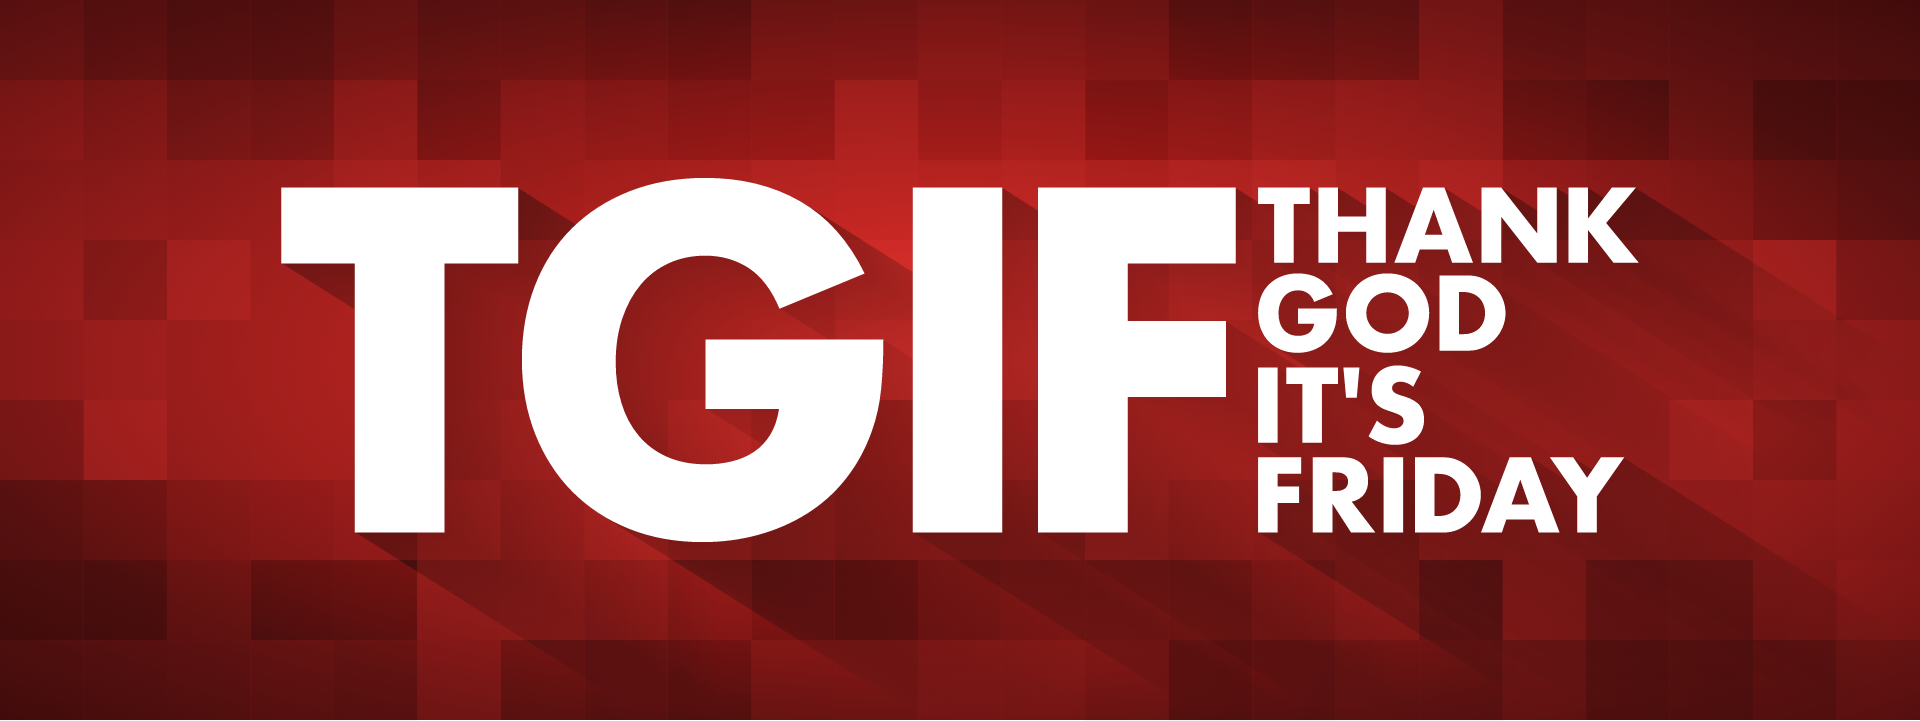 Photo shows the letters "TGIF" - Thank God it's Friday!